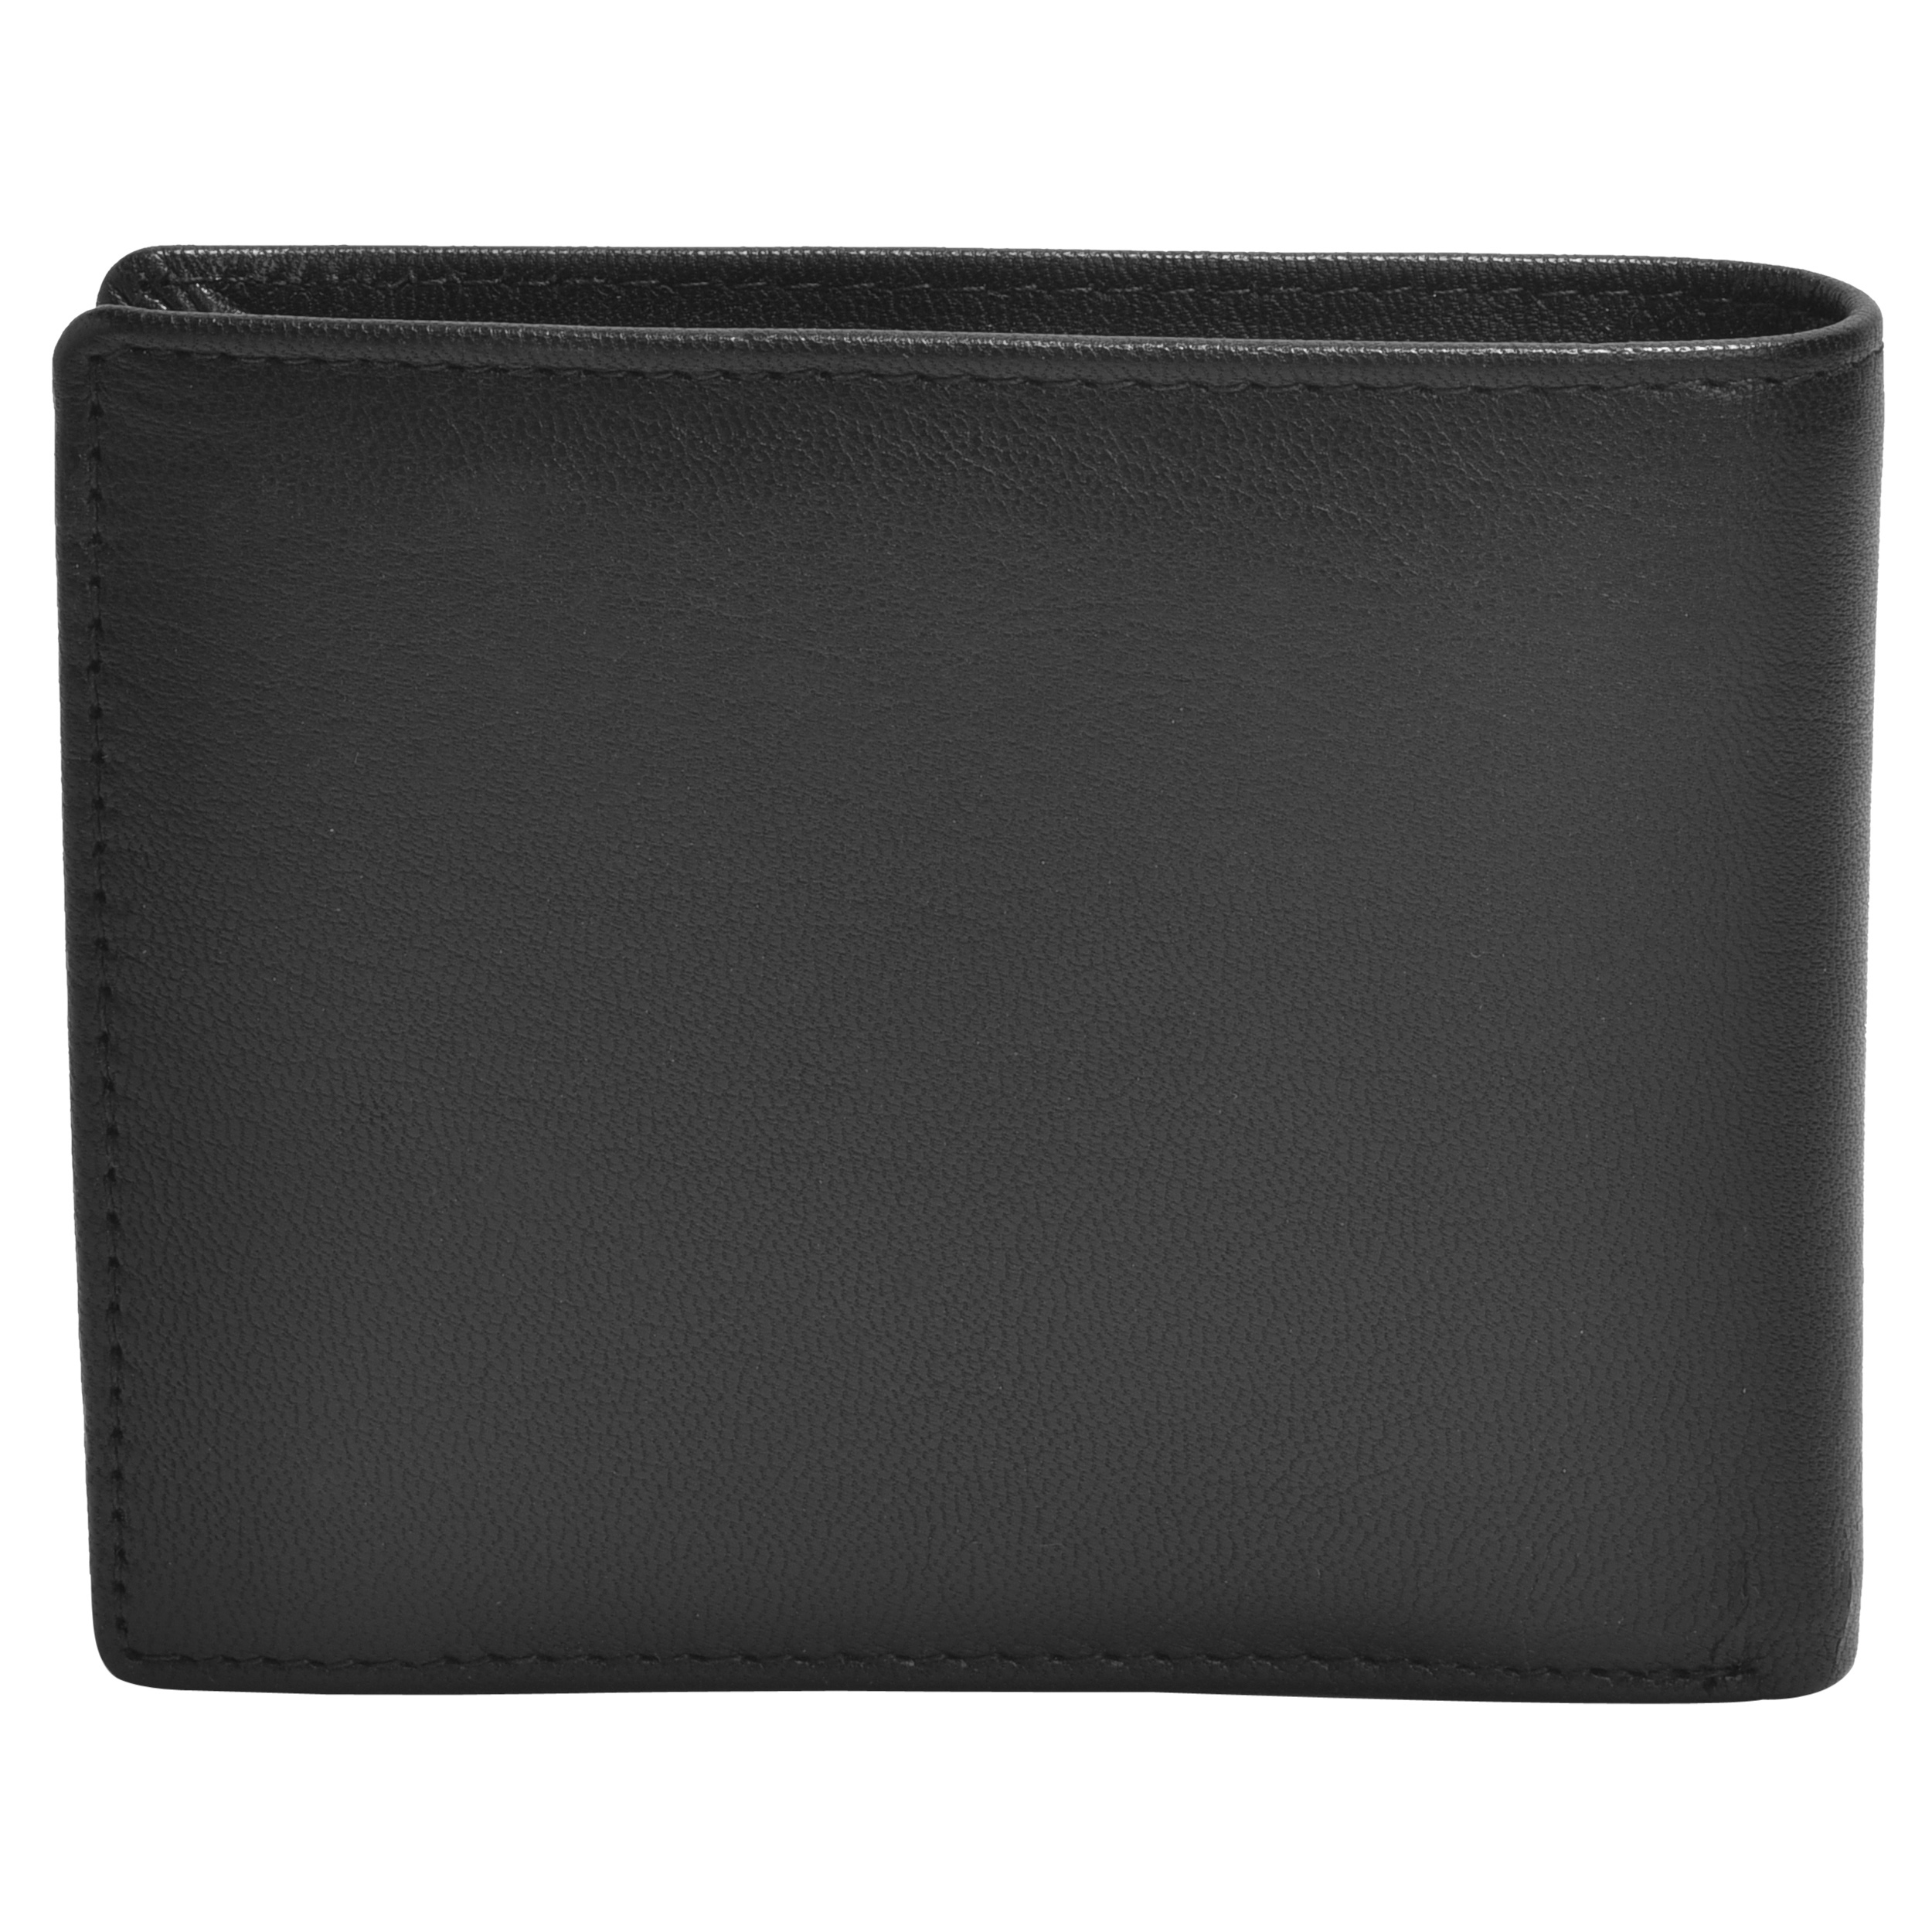 Goat Leather Nappa Wallet Bulk Deal at Marketplace for Leather Goods